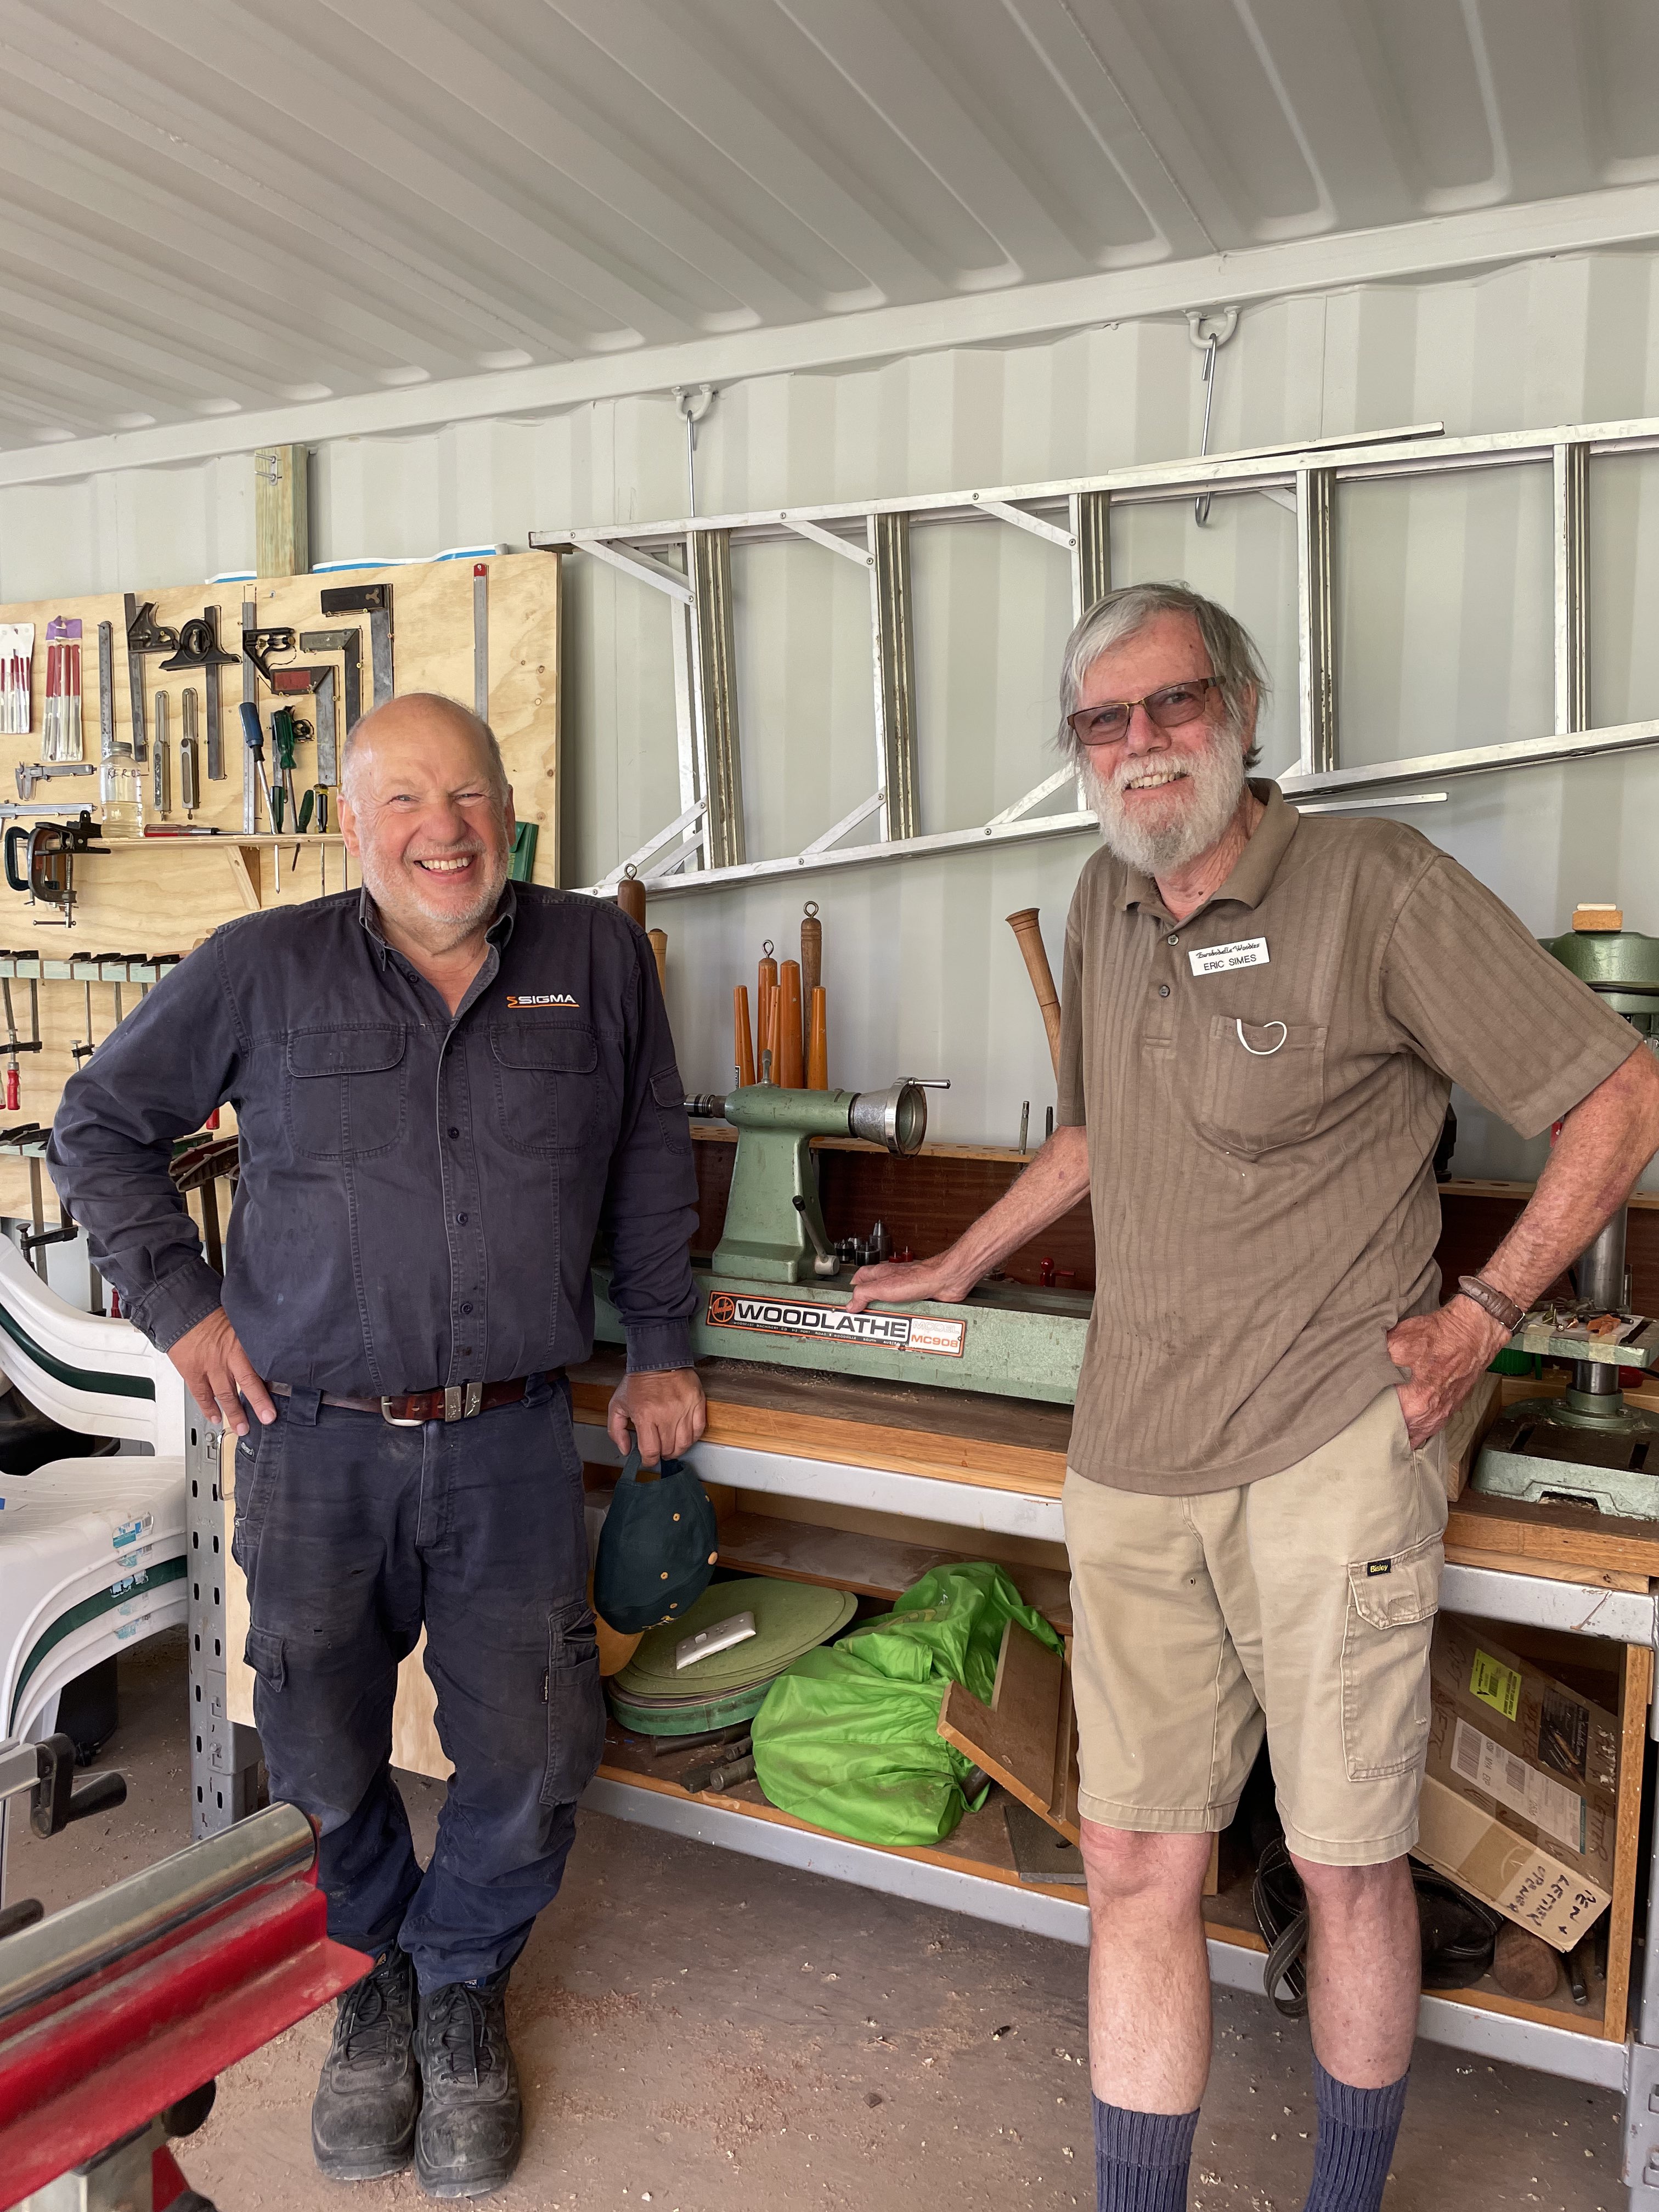 'We're not sure what to do': Eurobodalla Woodcraft Guild forgotten by local government